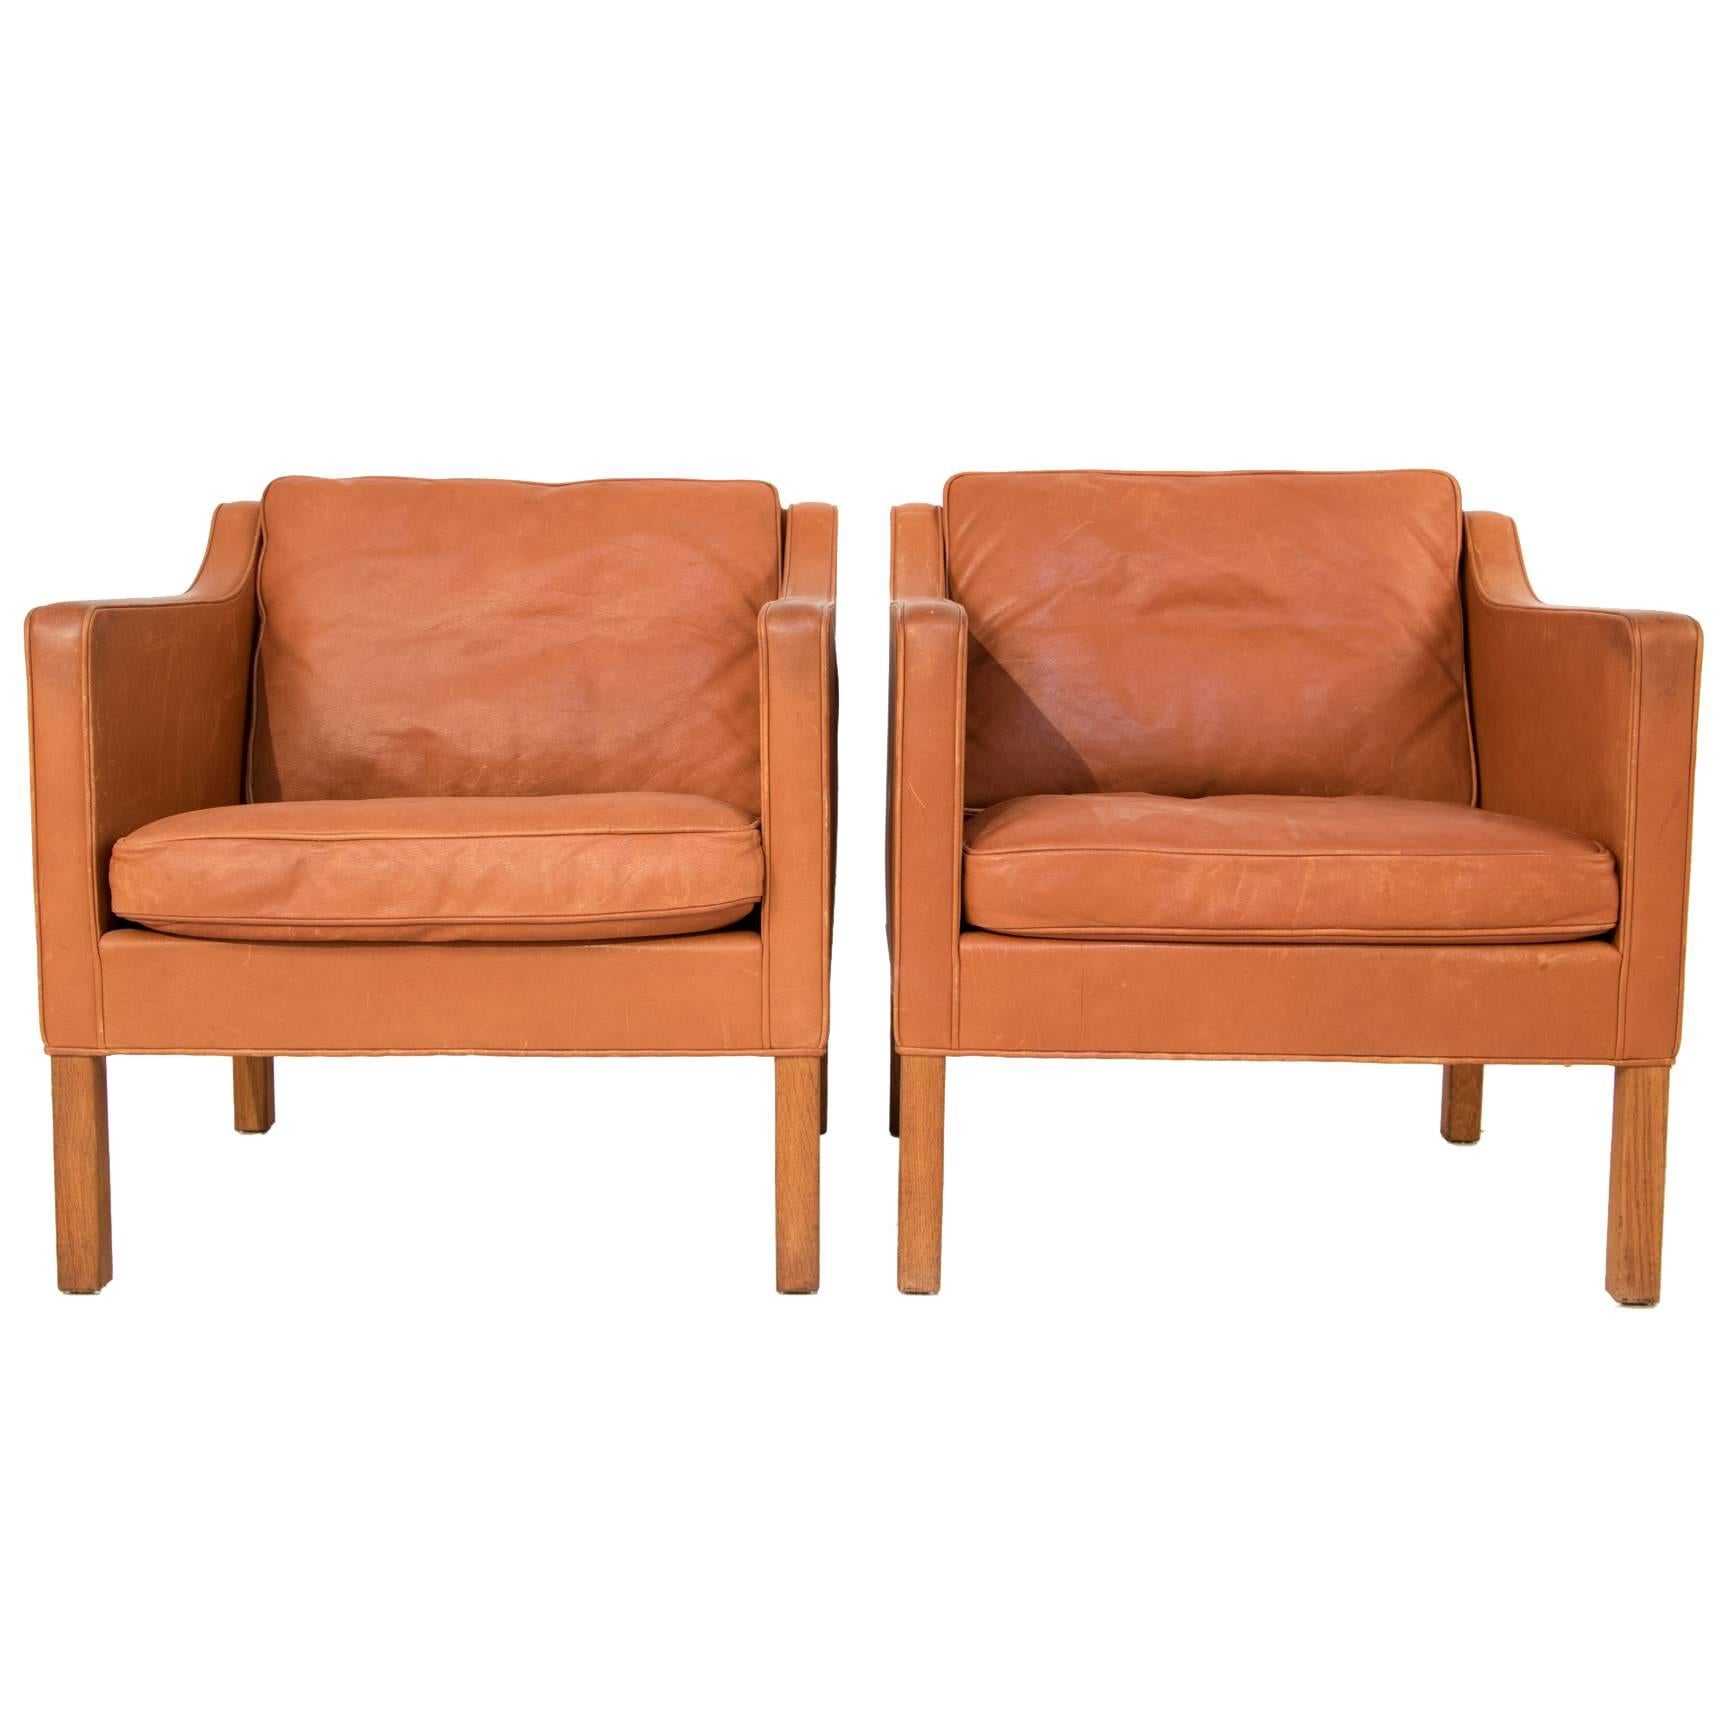 Pair of Leather Club Chairs by Børge Mogensen